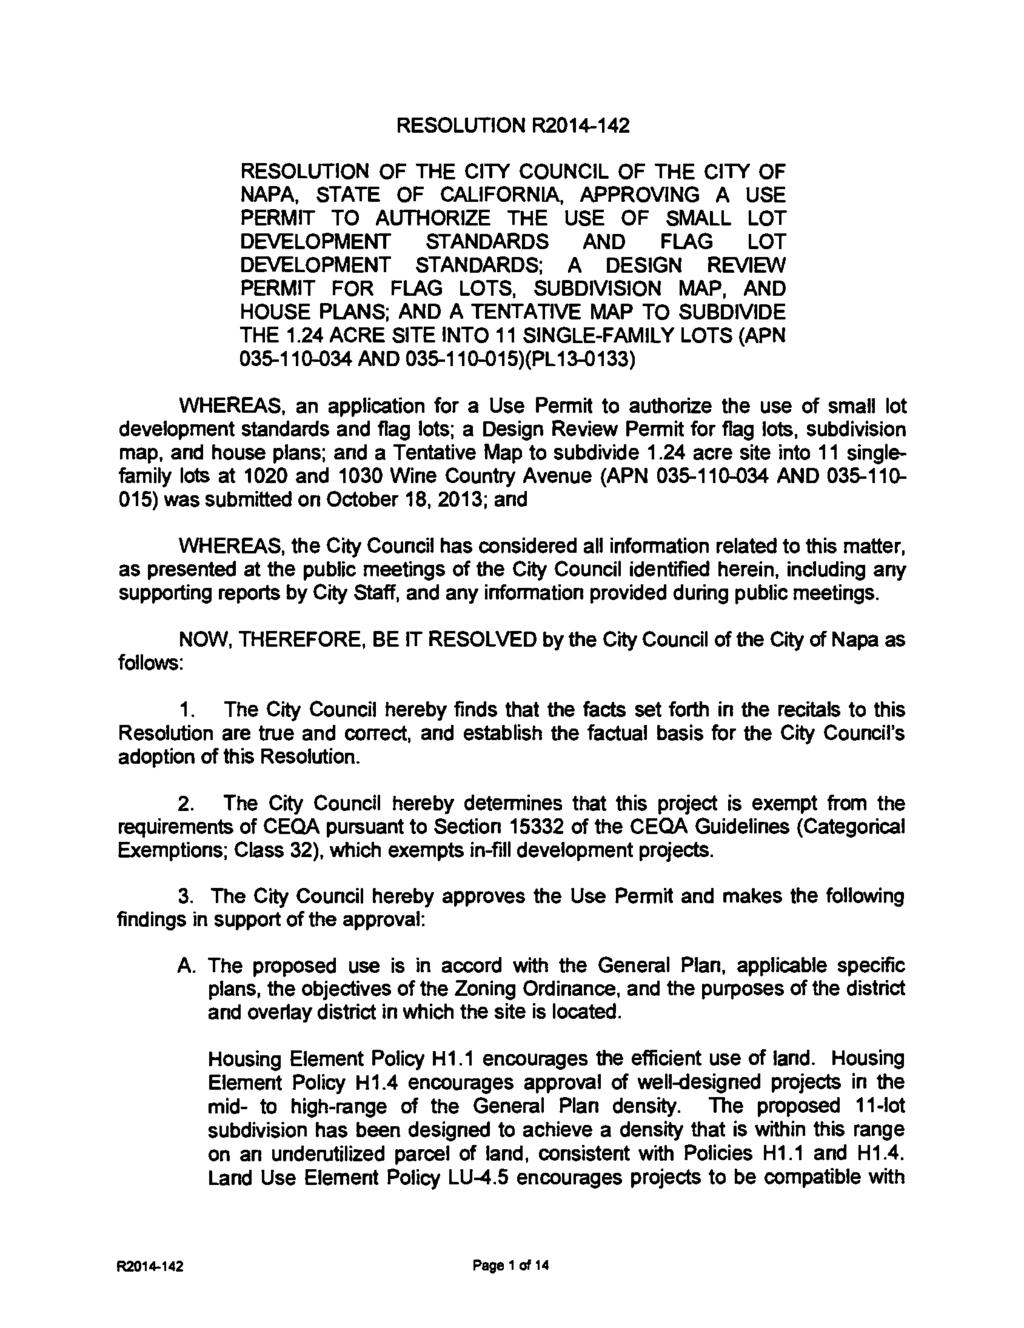 RESOLUTION R2014-142 RESOLUTION OF THE CITY COUNCIL OF THE CITY OF NAPA, STATE OF CALIFORNIA, APPROVING A USE PERMIT TO AUTHORIZE THE USE OF SMALL LOT DEVELOPMENT STANDARDS AND FLAG LOT DEVELOPMENT